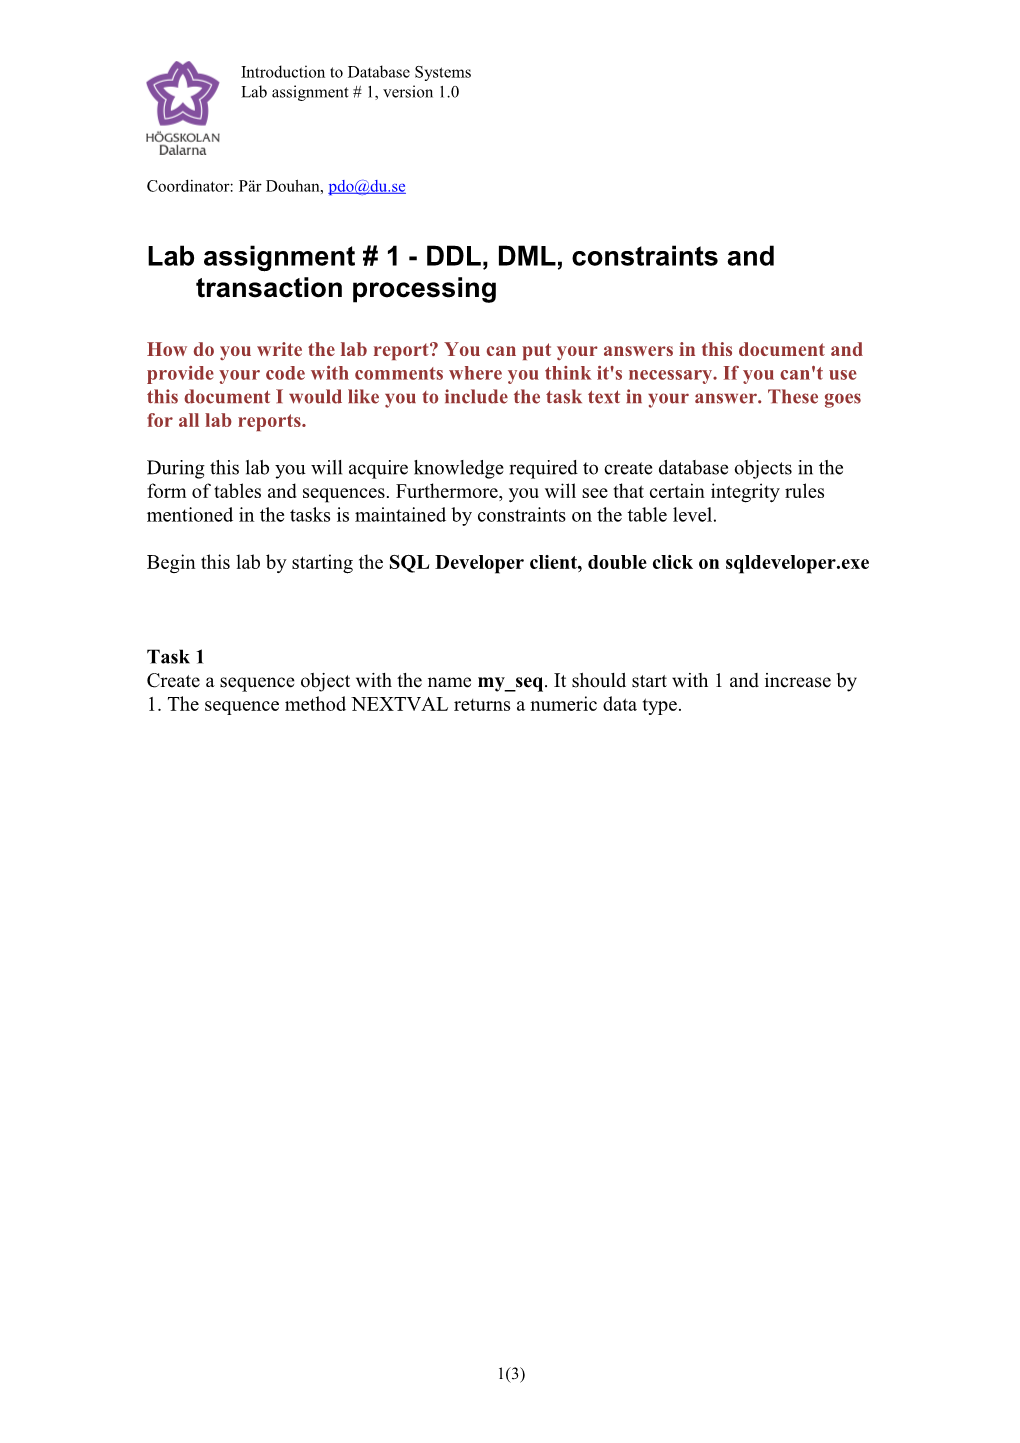 Lab Assignment # 1 - DDL, DML, Constraints and Transaction Processing